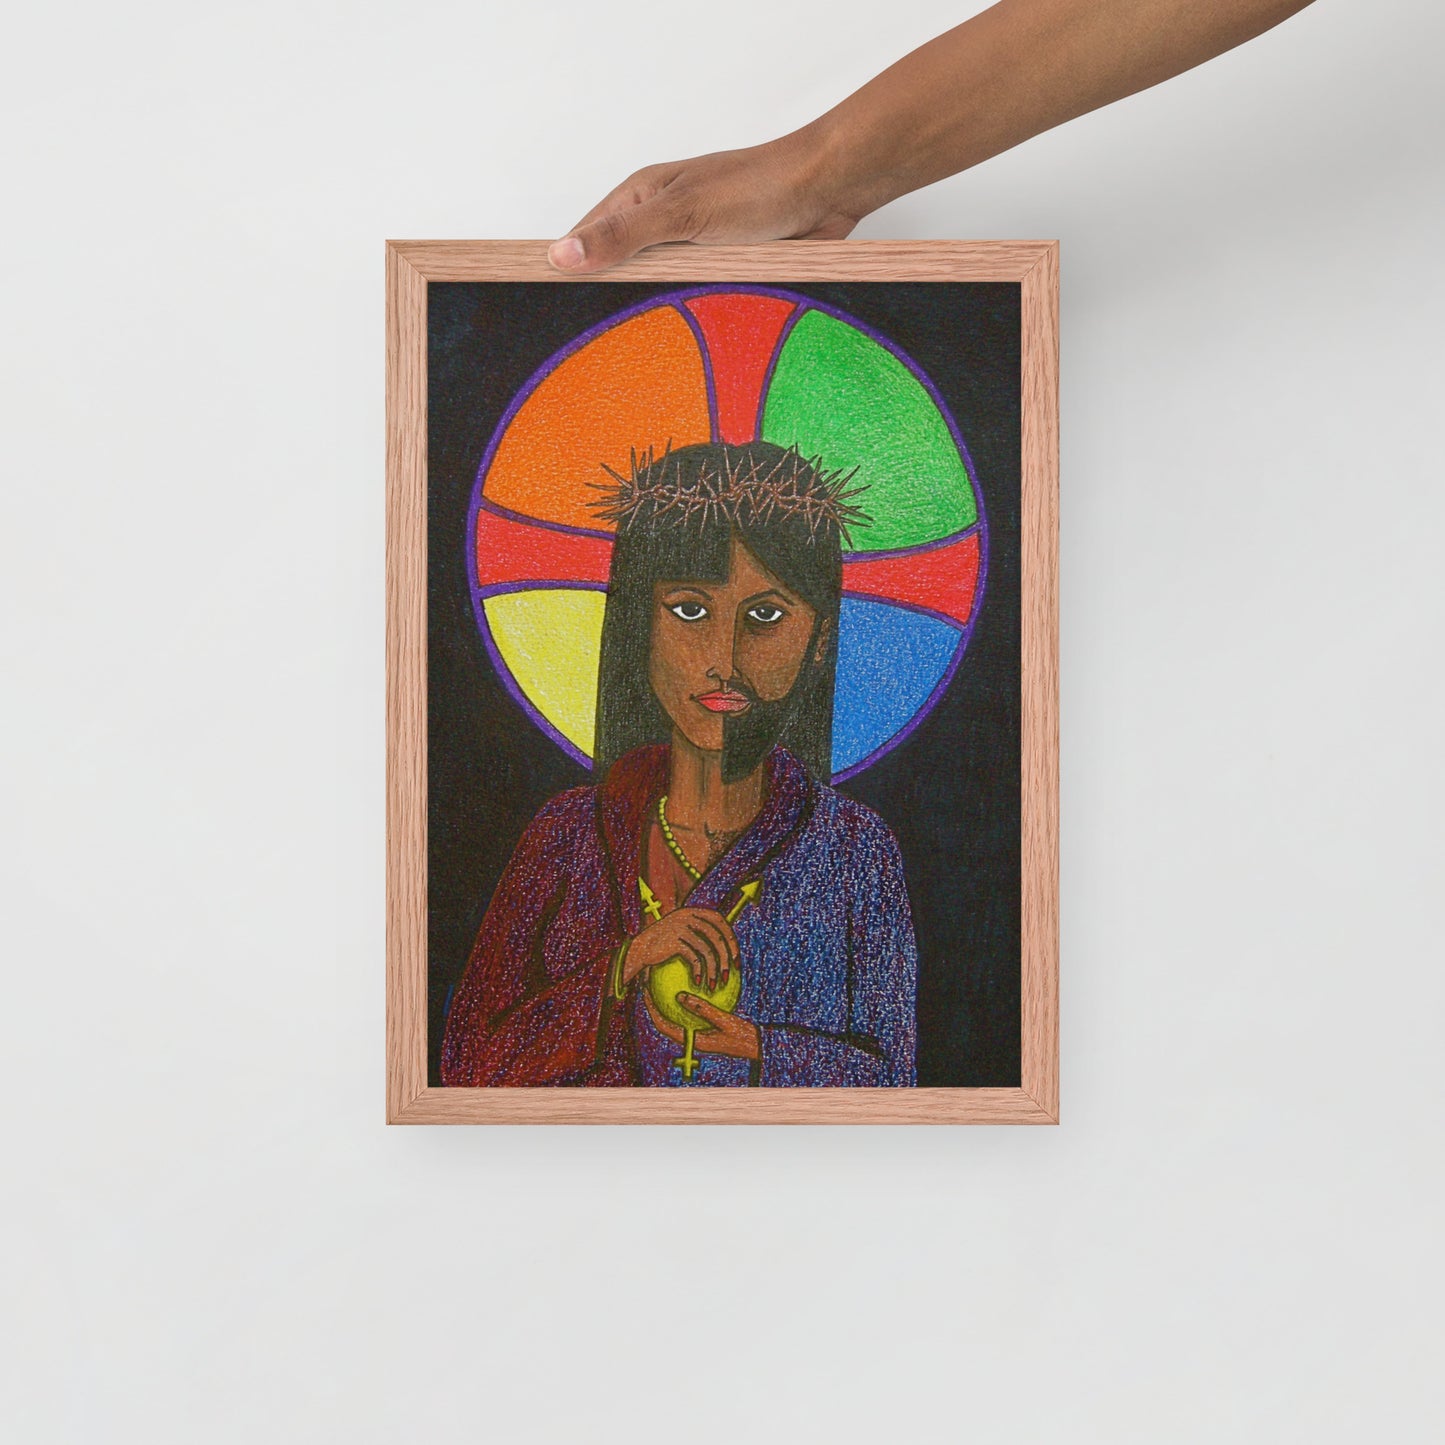 Neither Image of Christ Print